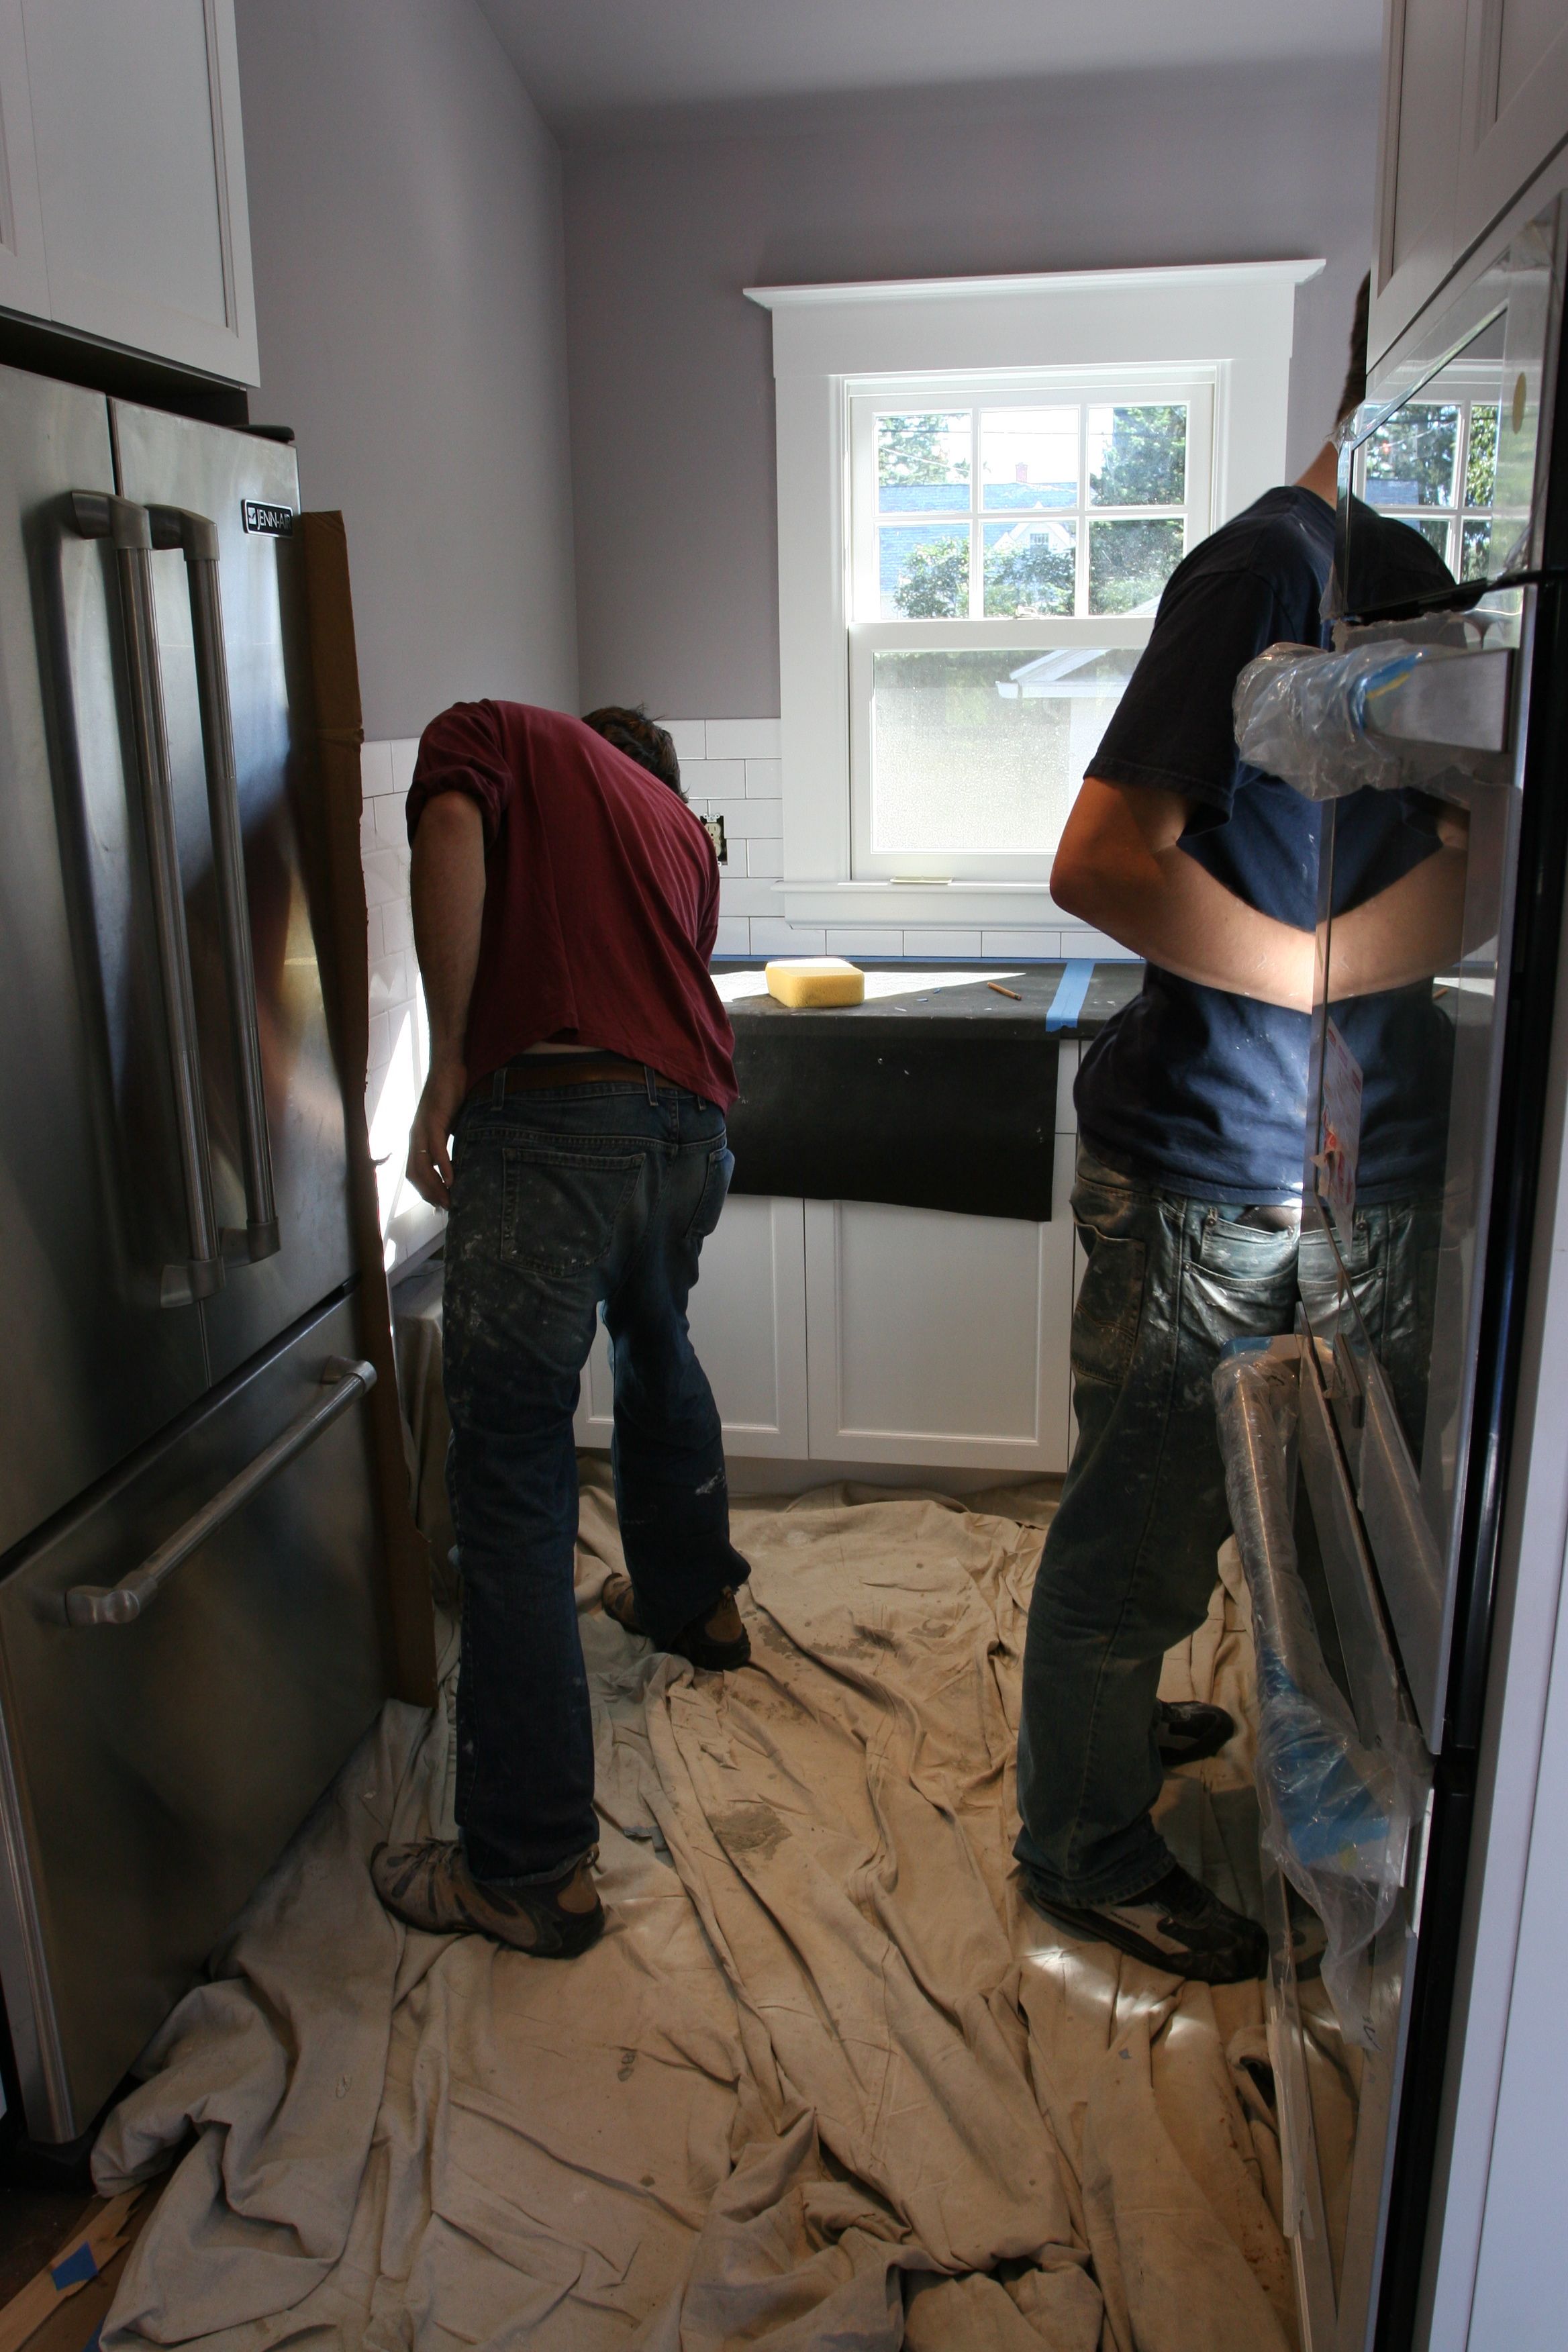 The boys grouting away. (THEY started singing "Let's get it grouted in here" a la The Black Eyed Peas. They, not me.)